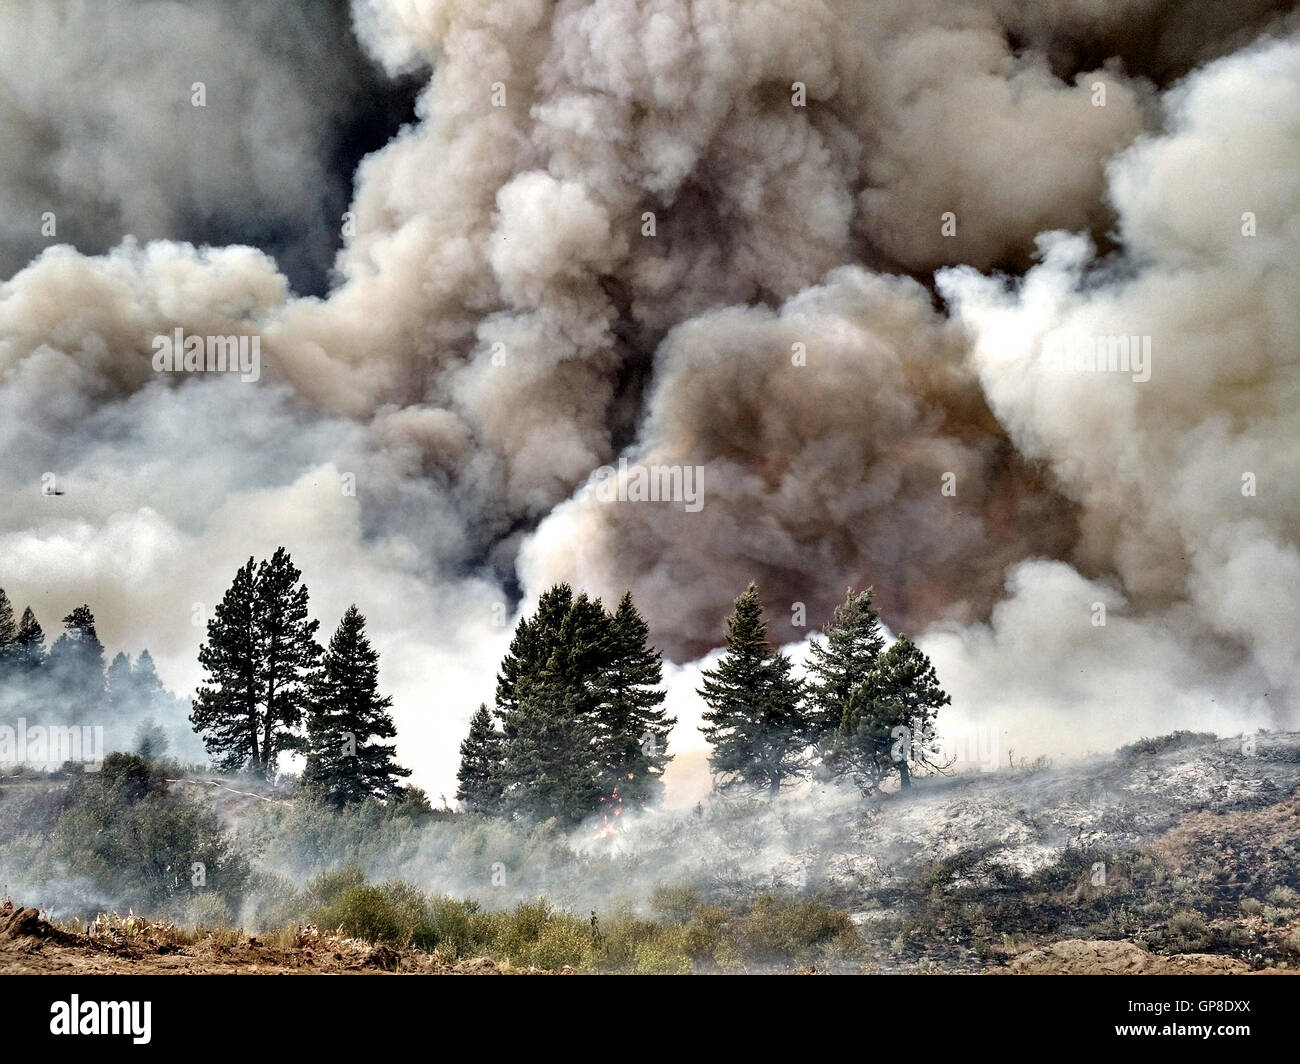 Flames and smoke rise from the Pioneer Fire burning in the Boise National Forest August 5, 2016 northeast of Boise, Idaho. The fire has burned nearly 250 square miles of forest and is being fought by 1100 firefighters. Stock Photo